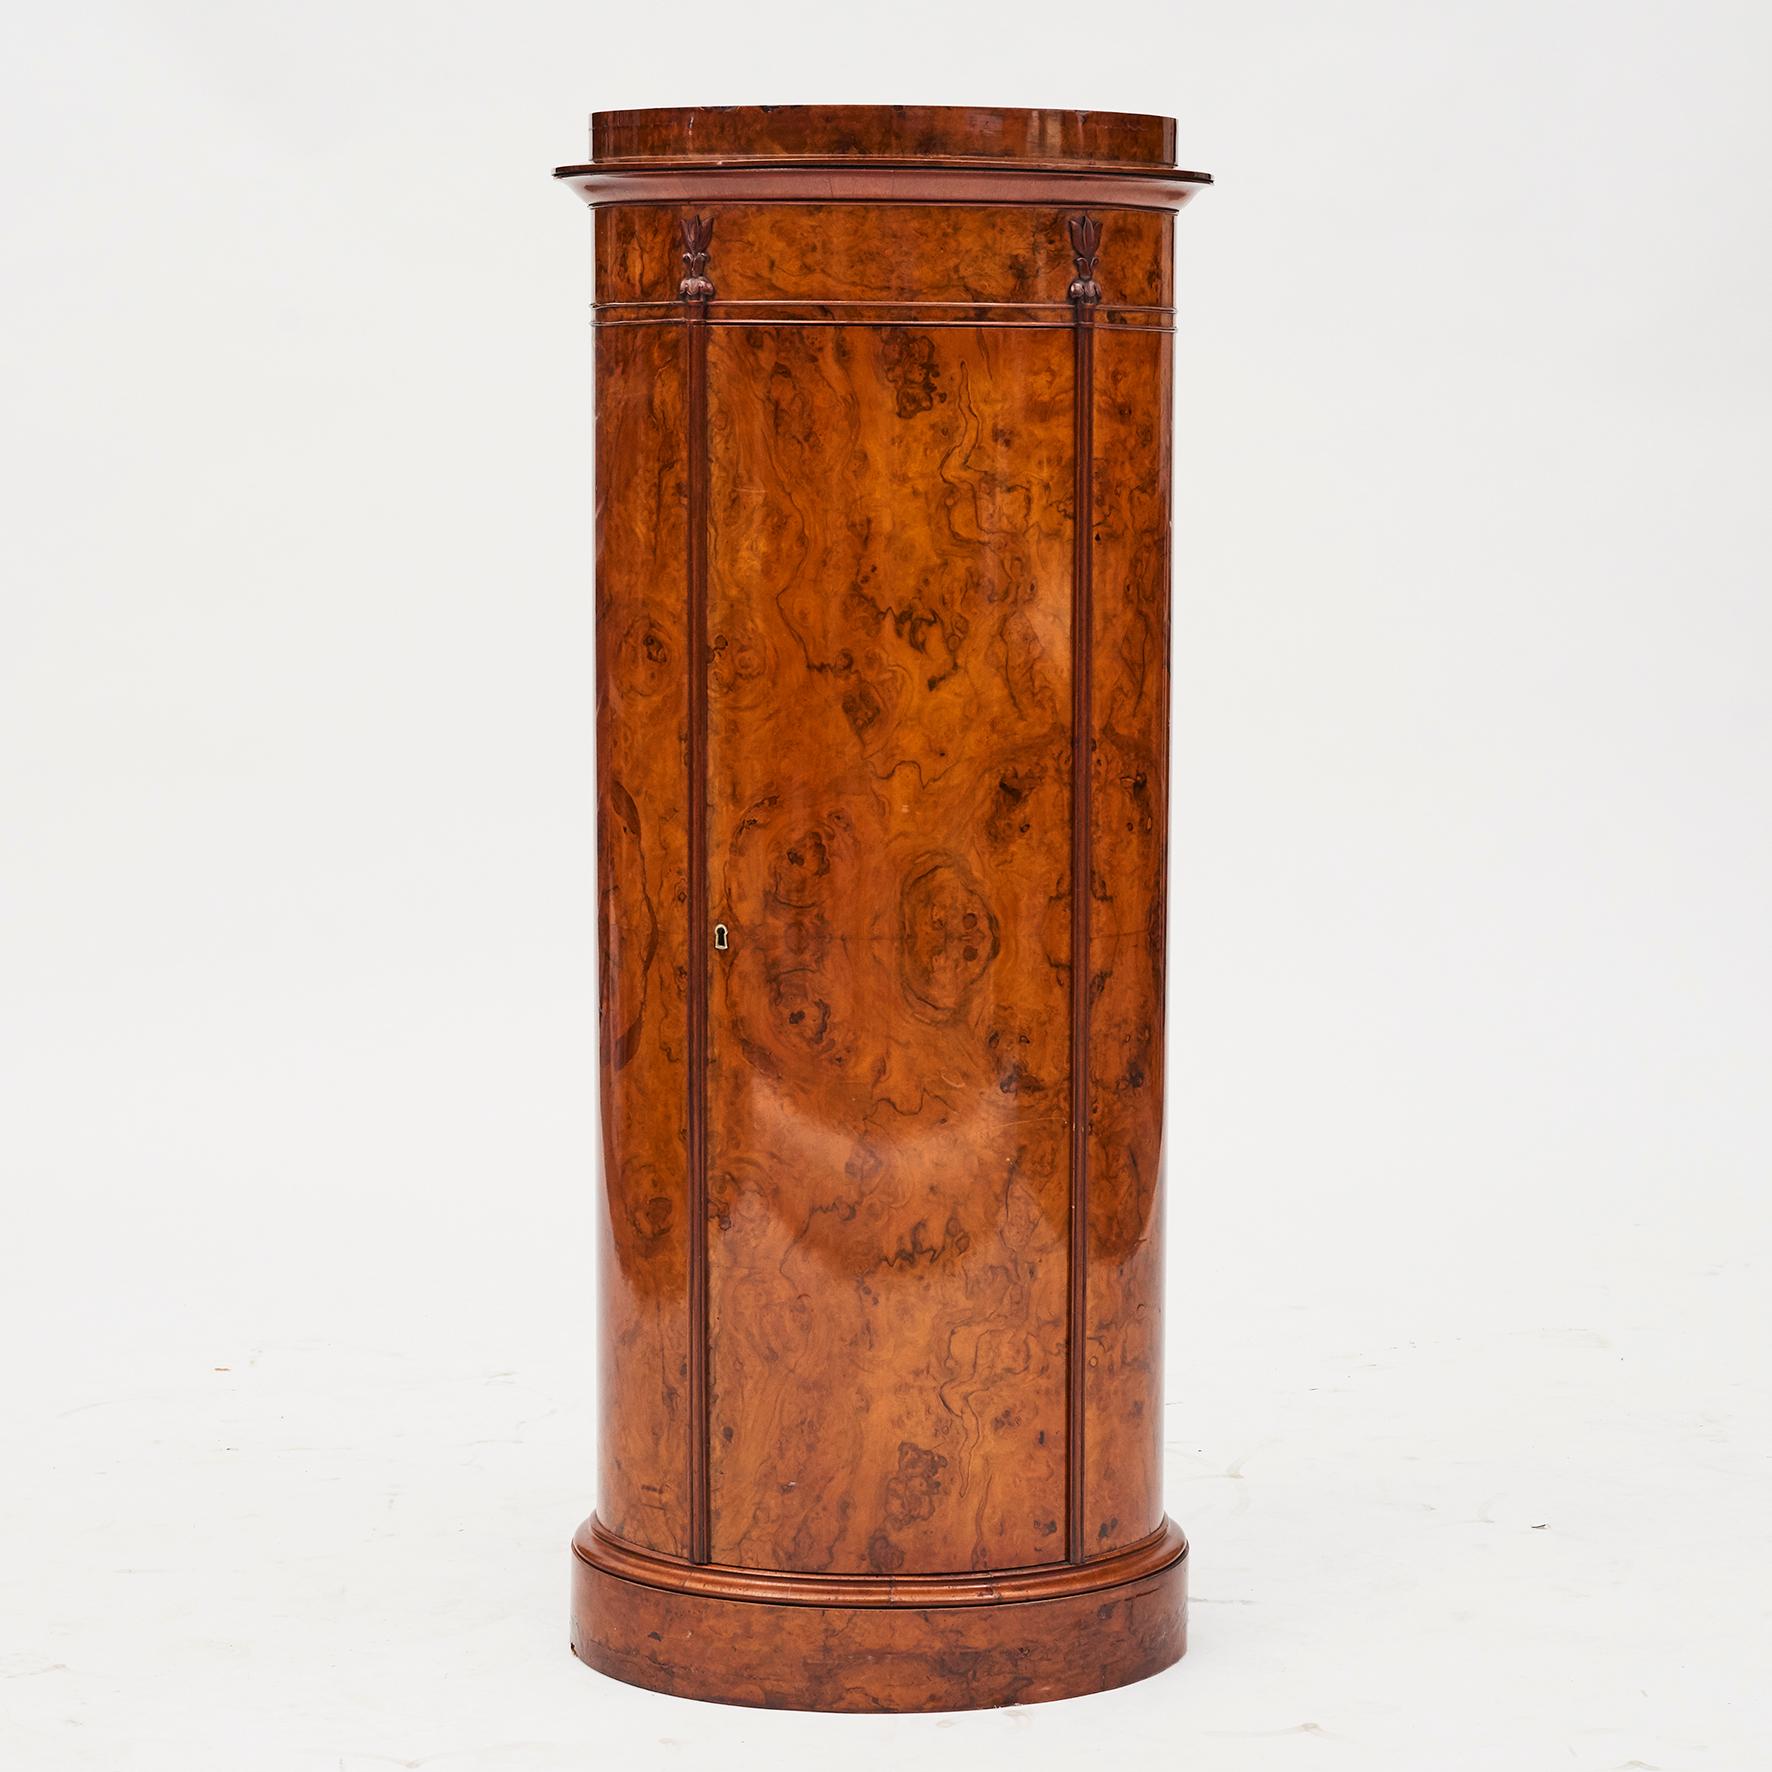 Cylinder burl walnut pedestal cabinet. Late Empire.
Oak beautifully veneered with walnut. A large front door that opens to reveal a set of three shelves.
Copenhagen, 1830-1840.